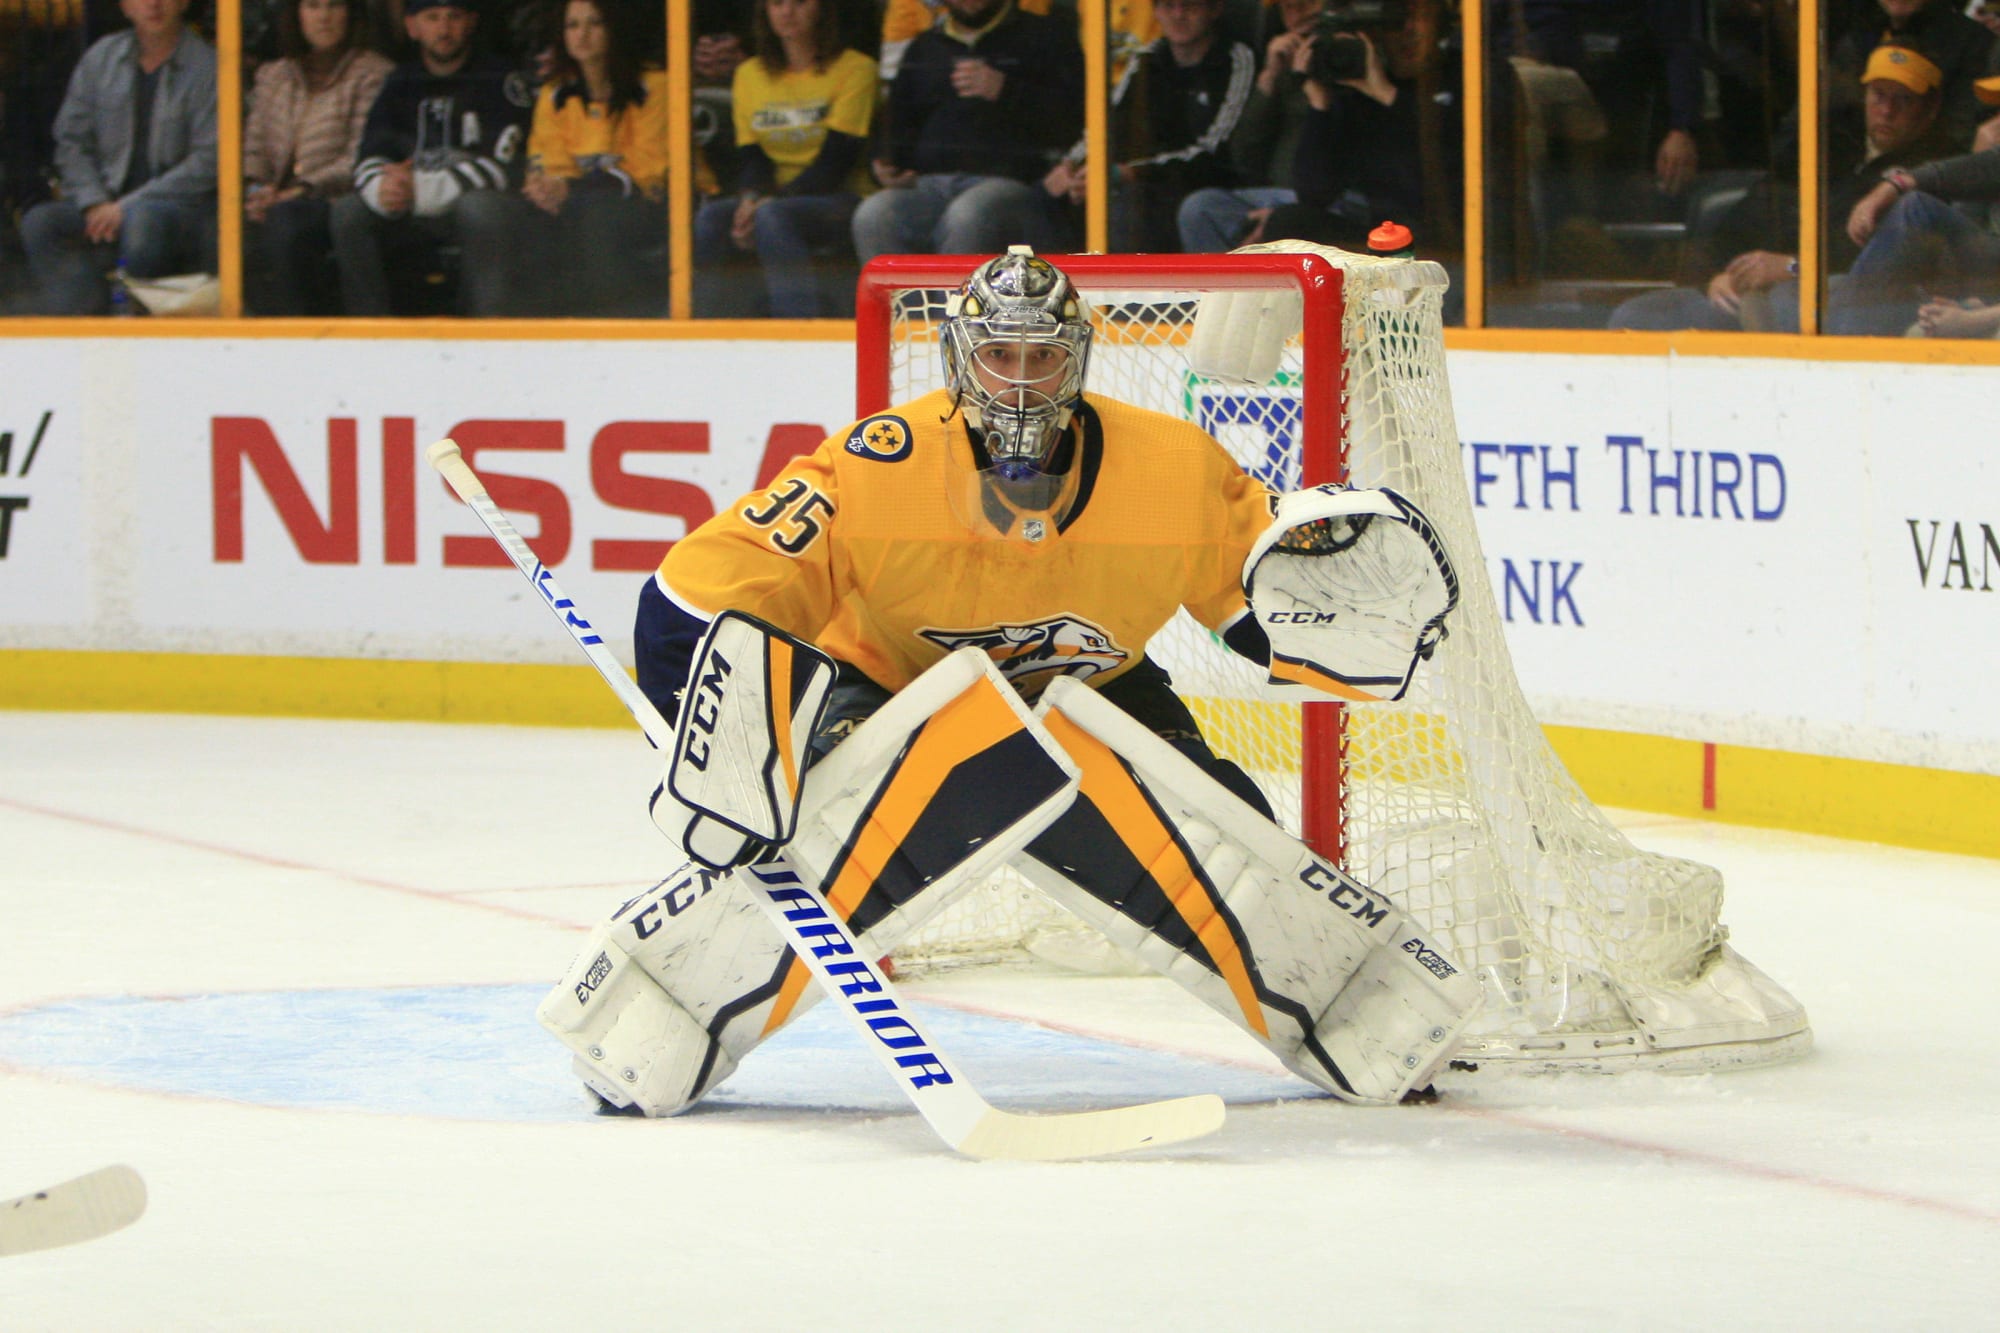 Pekka Rinne means more to Nashville than just hockey, statue